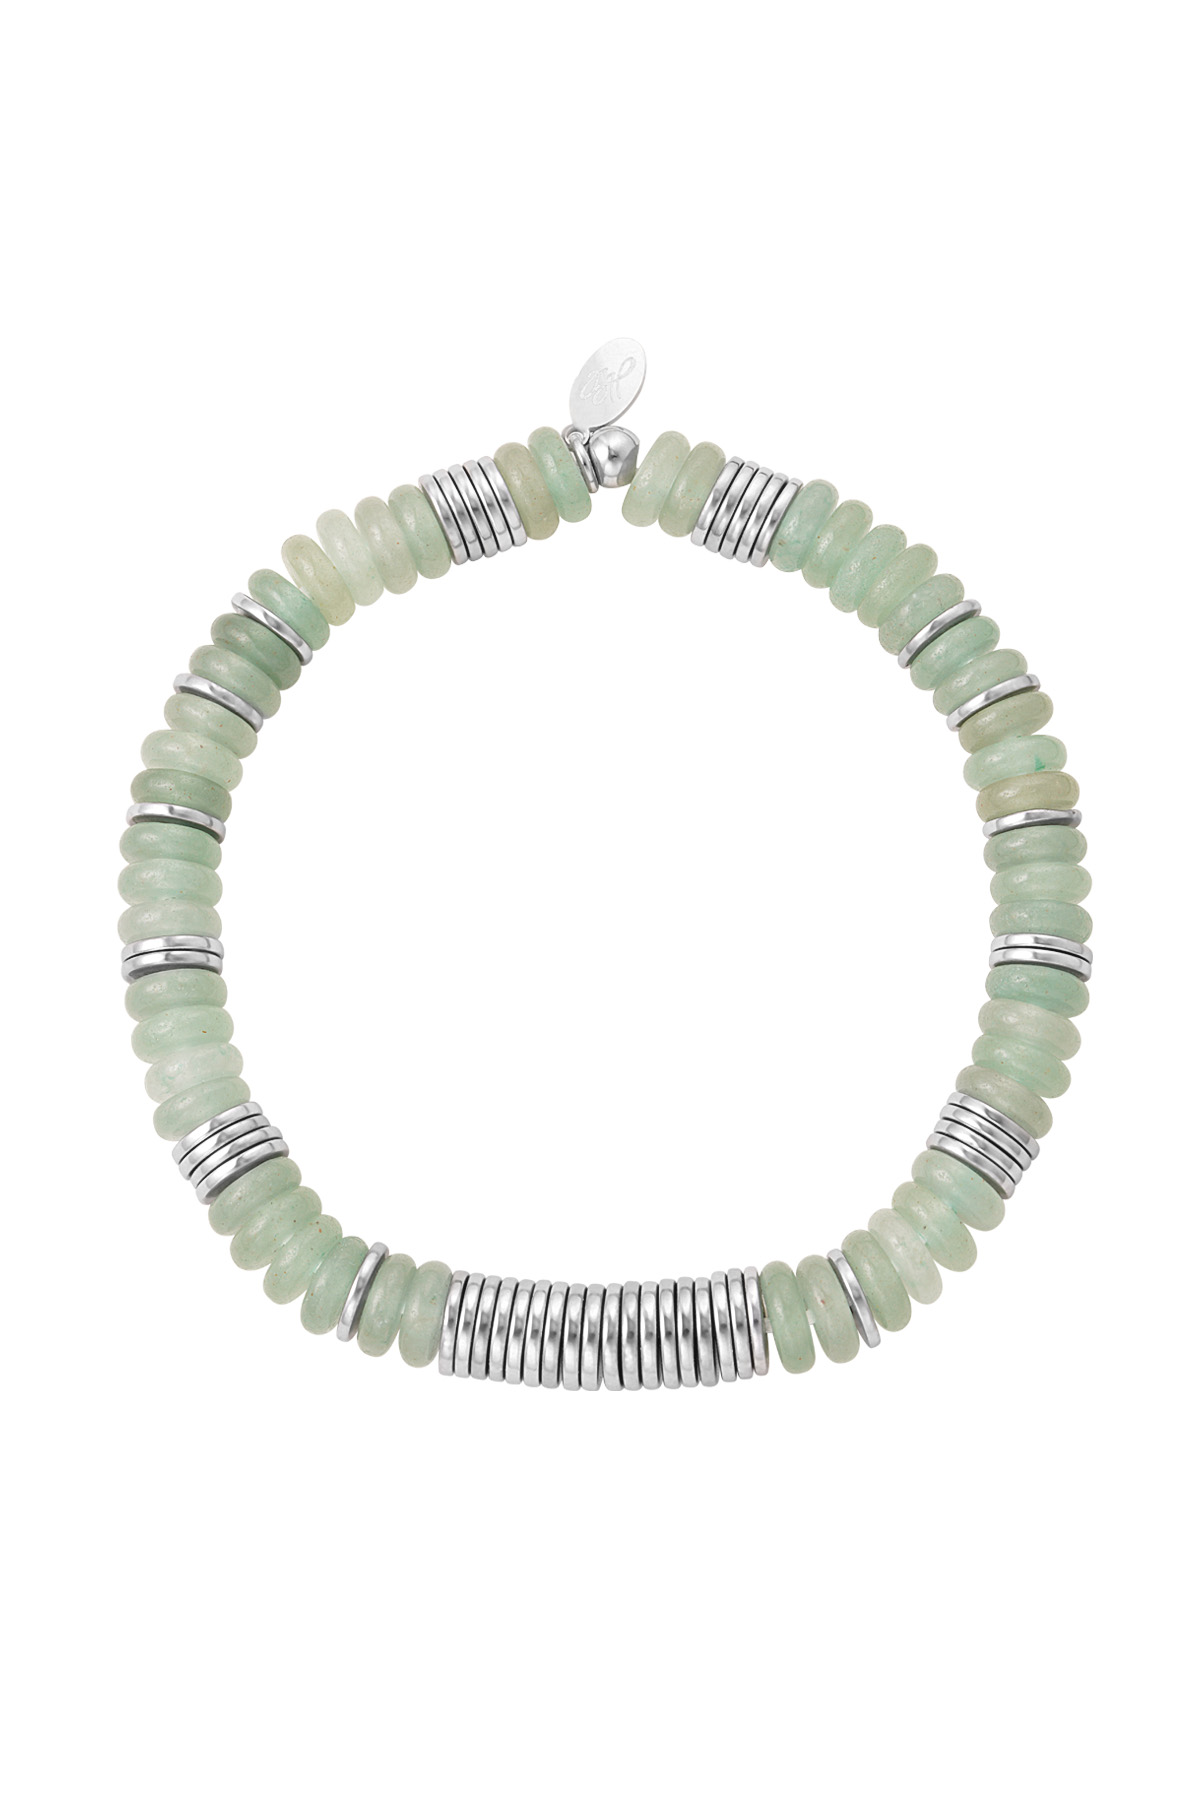 Chain bracelet beads - silver/green Green &amp; Silver Stainless Steel